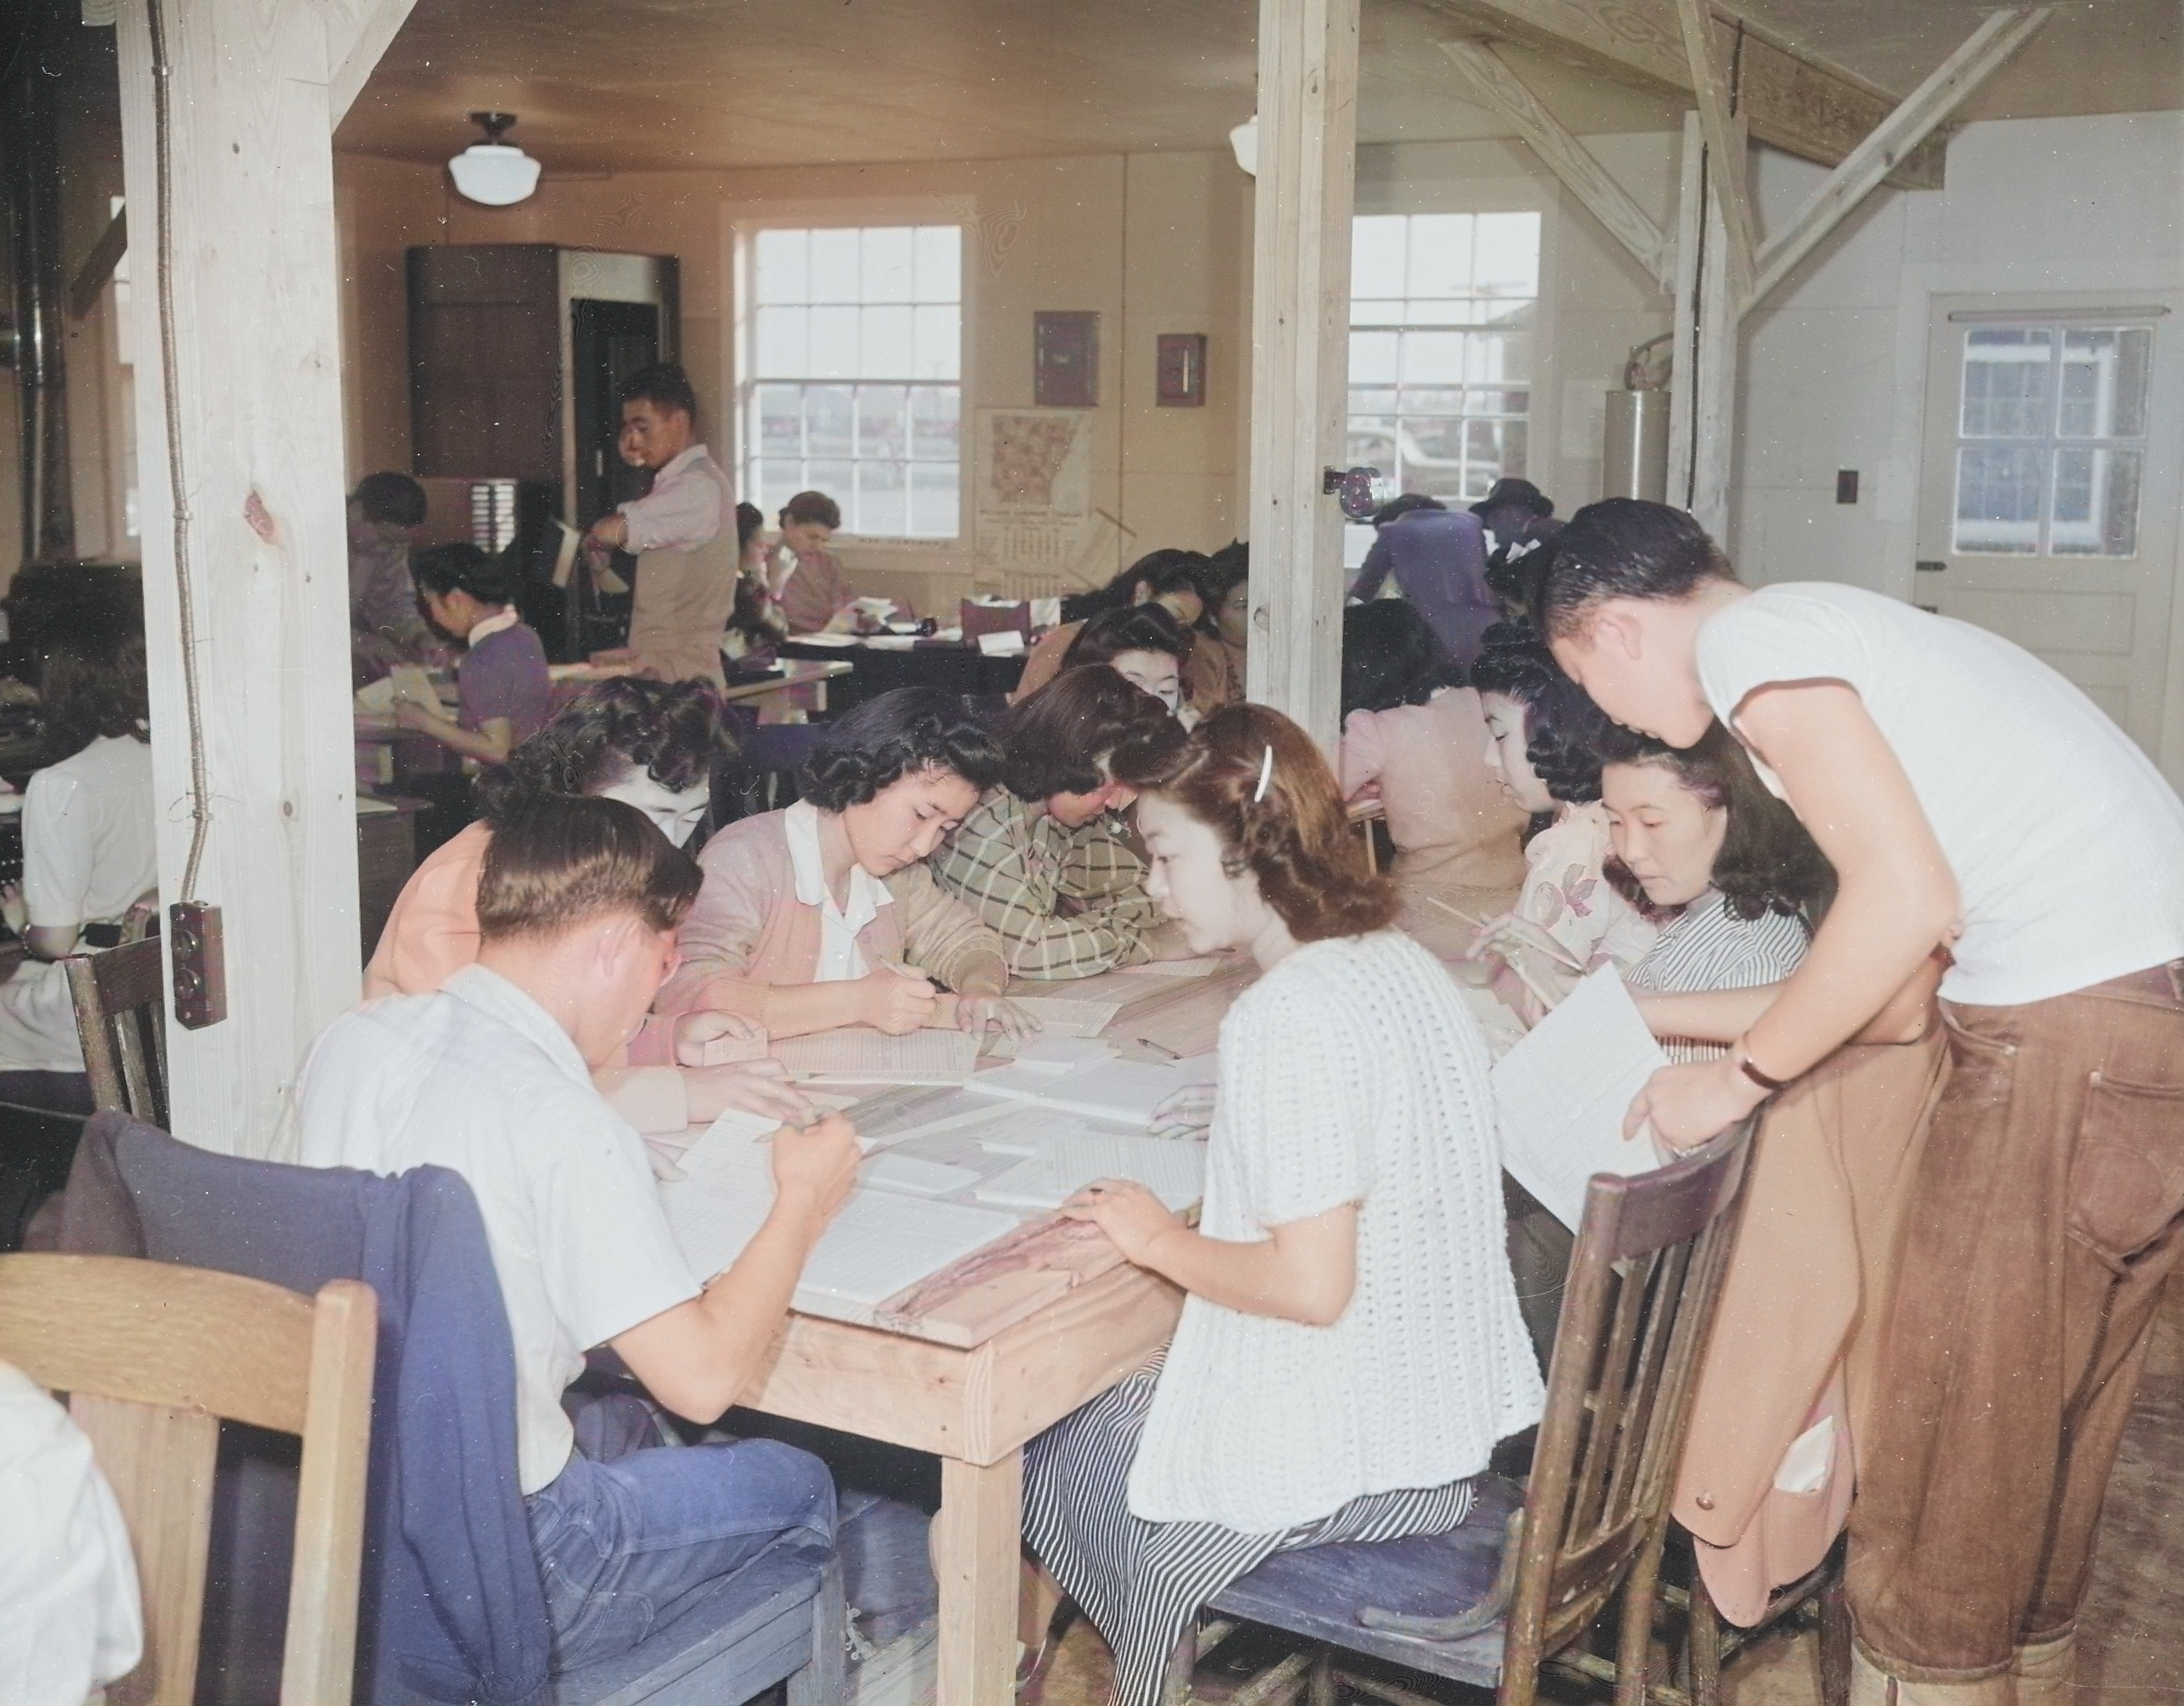 Workers at the Welfare Department of Jerome War Relocation Center, Arkansas, United States, 18 Nov 1942 [Colorized by WW2DB]